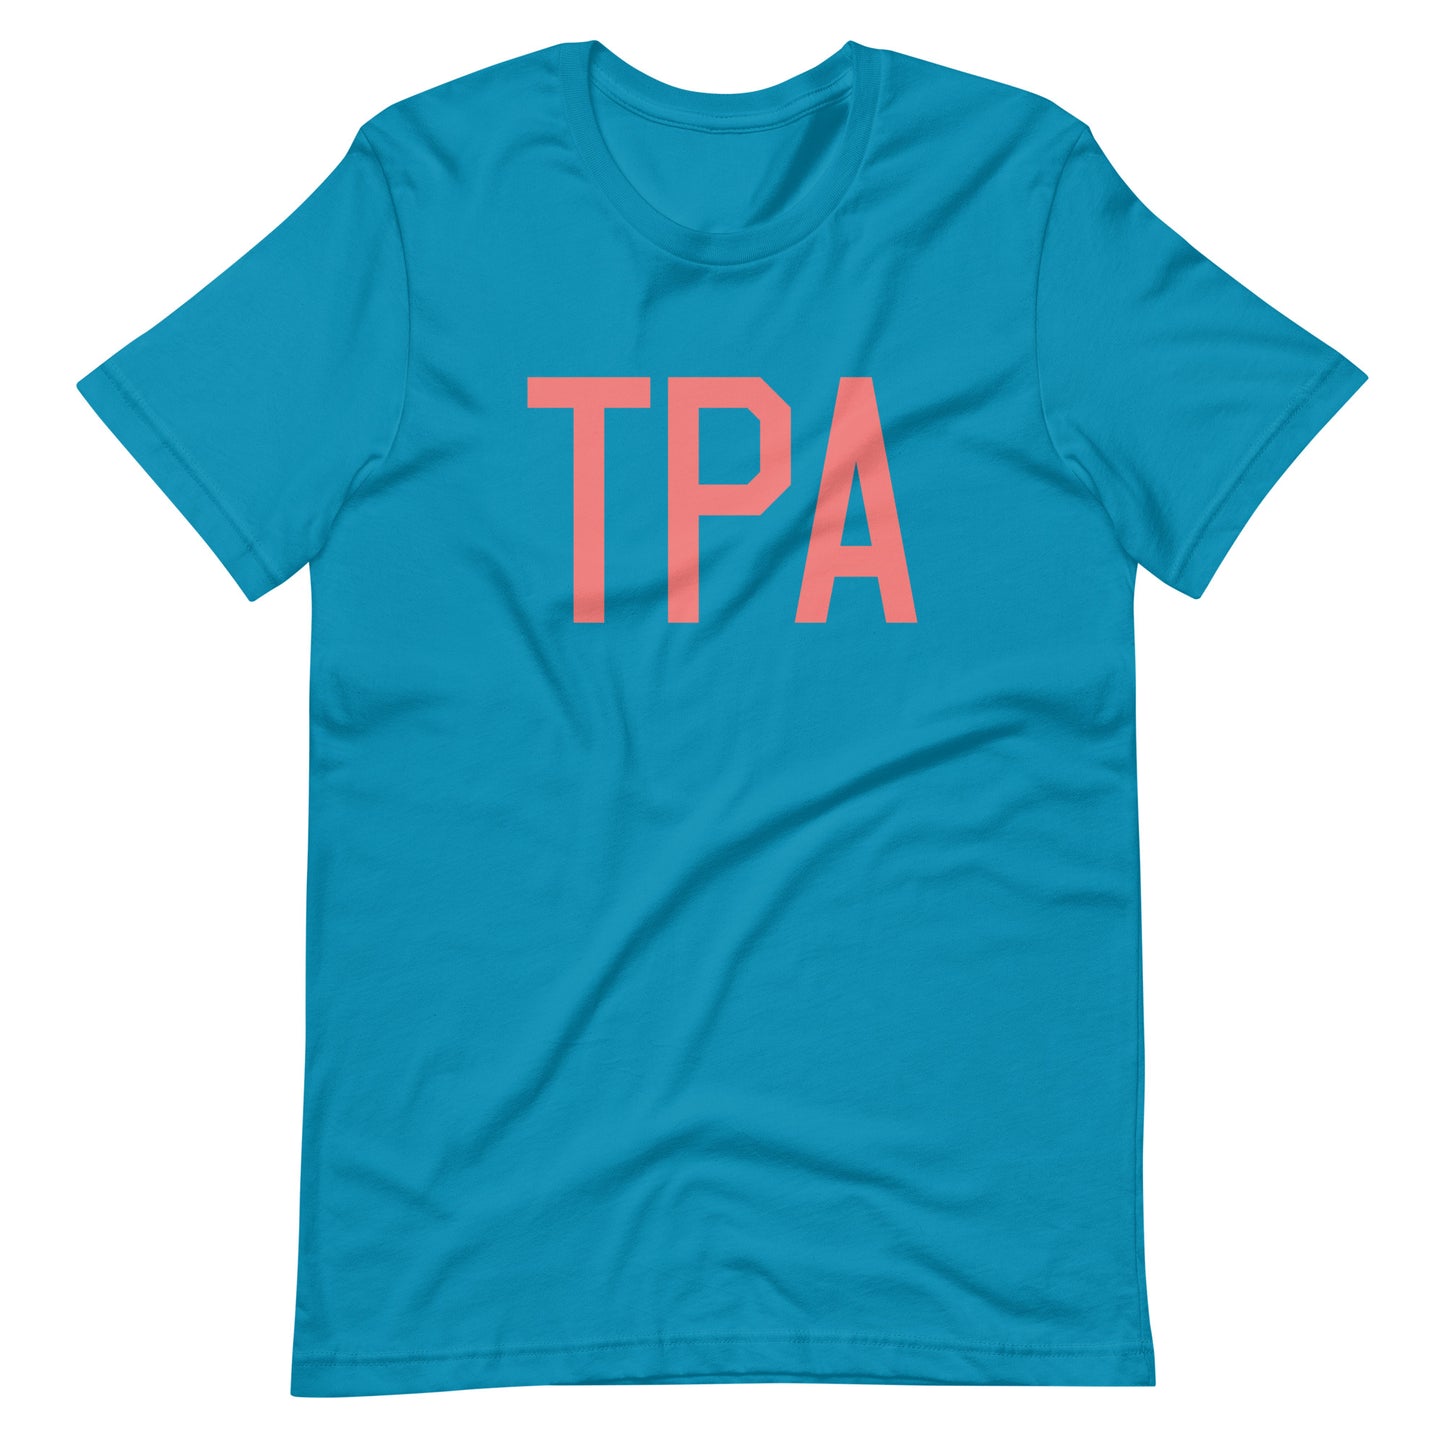 Aviation Enthusiast Unisex Tee - Pink Graphic • TPA Tampa • YHM Designs - Image 02